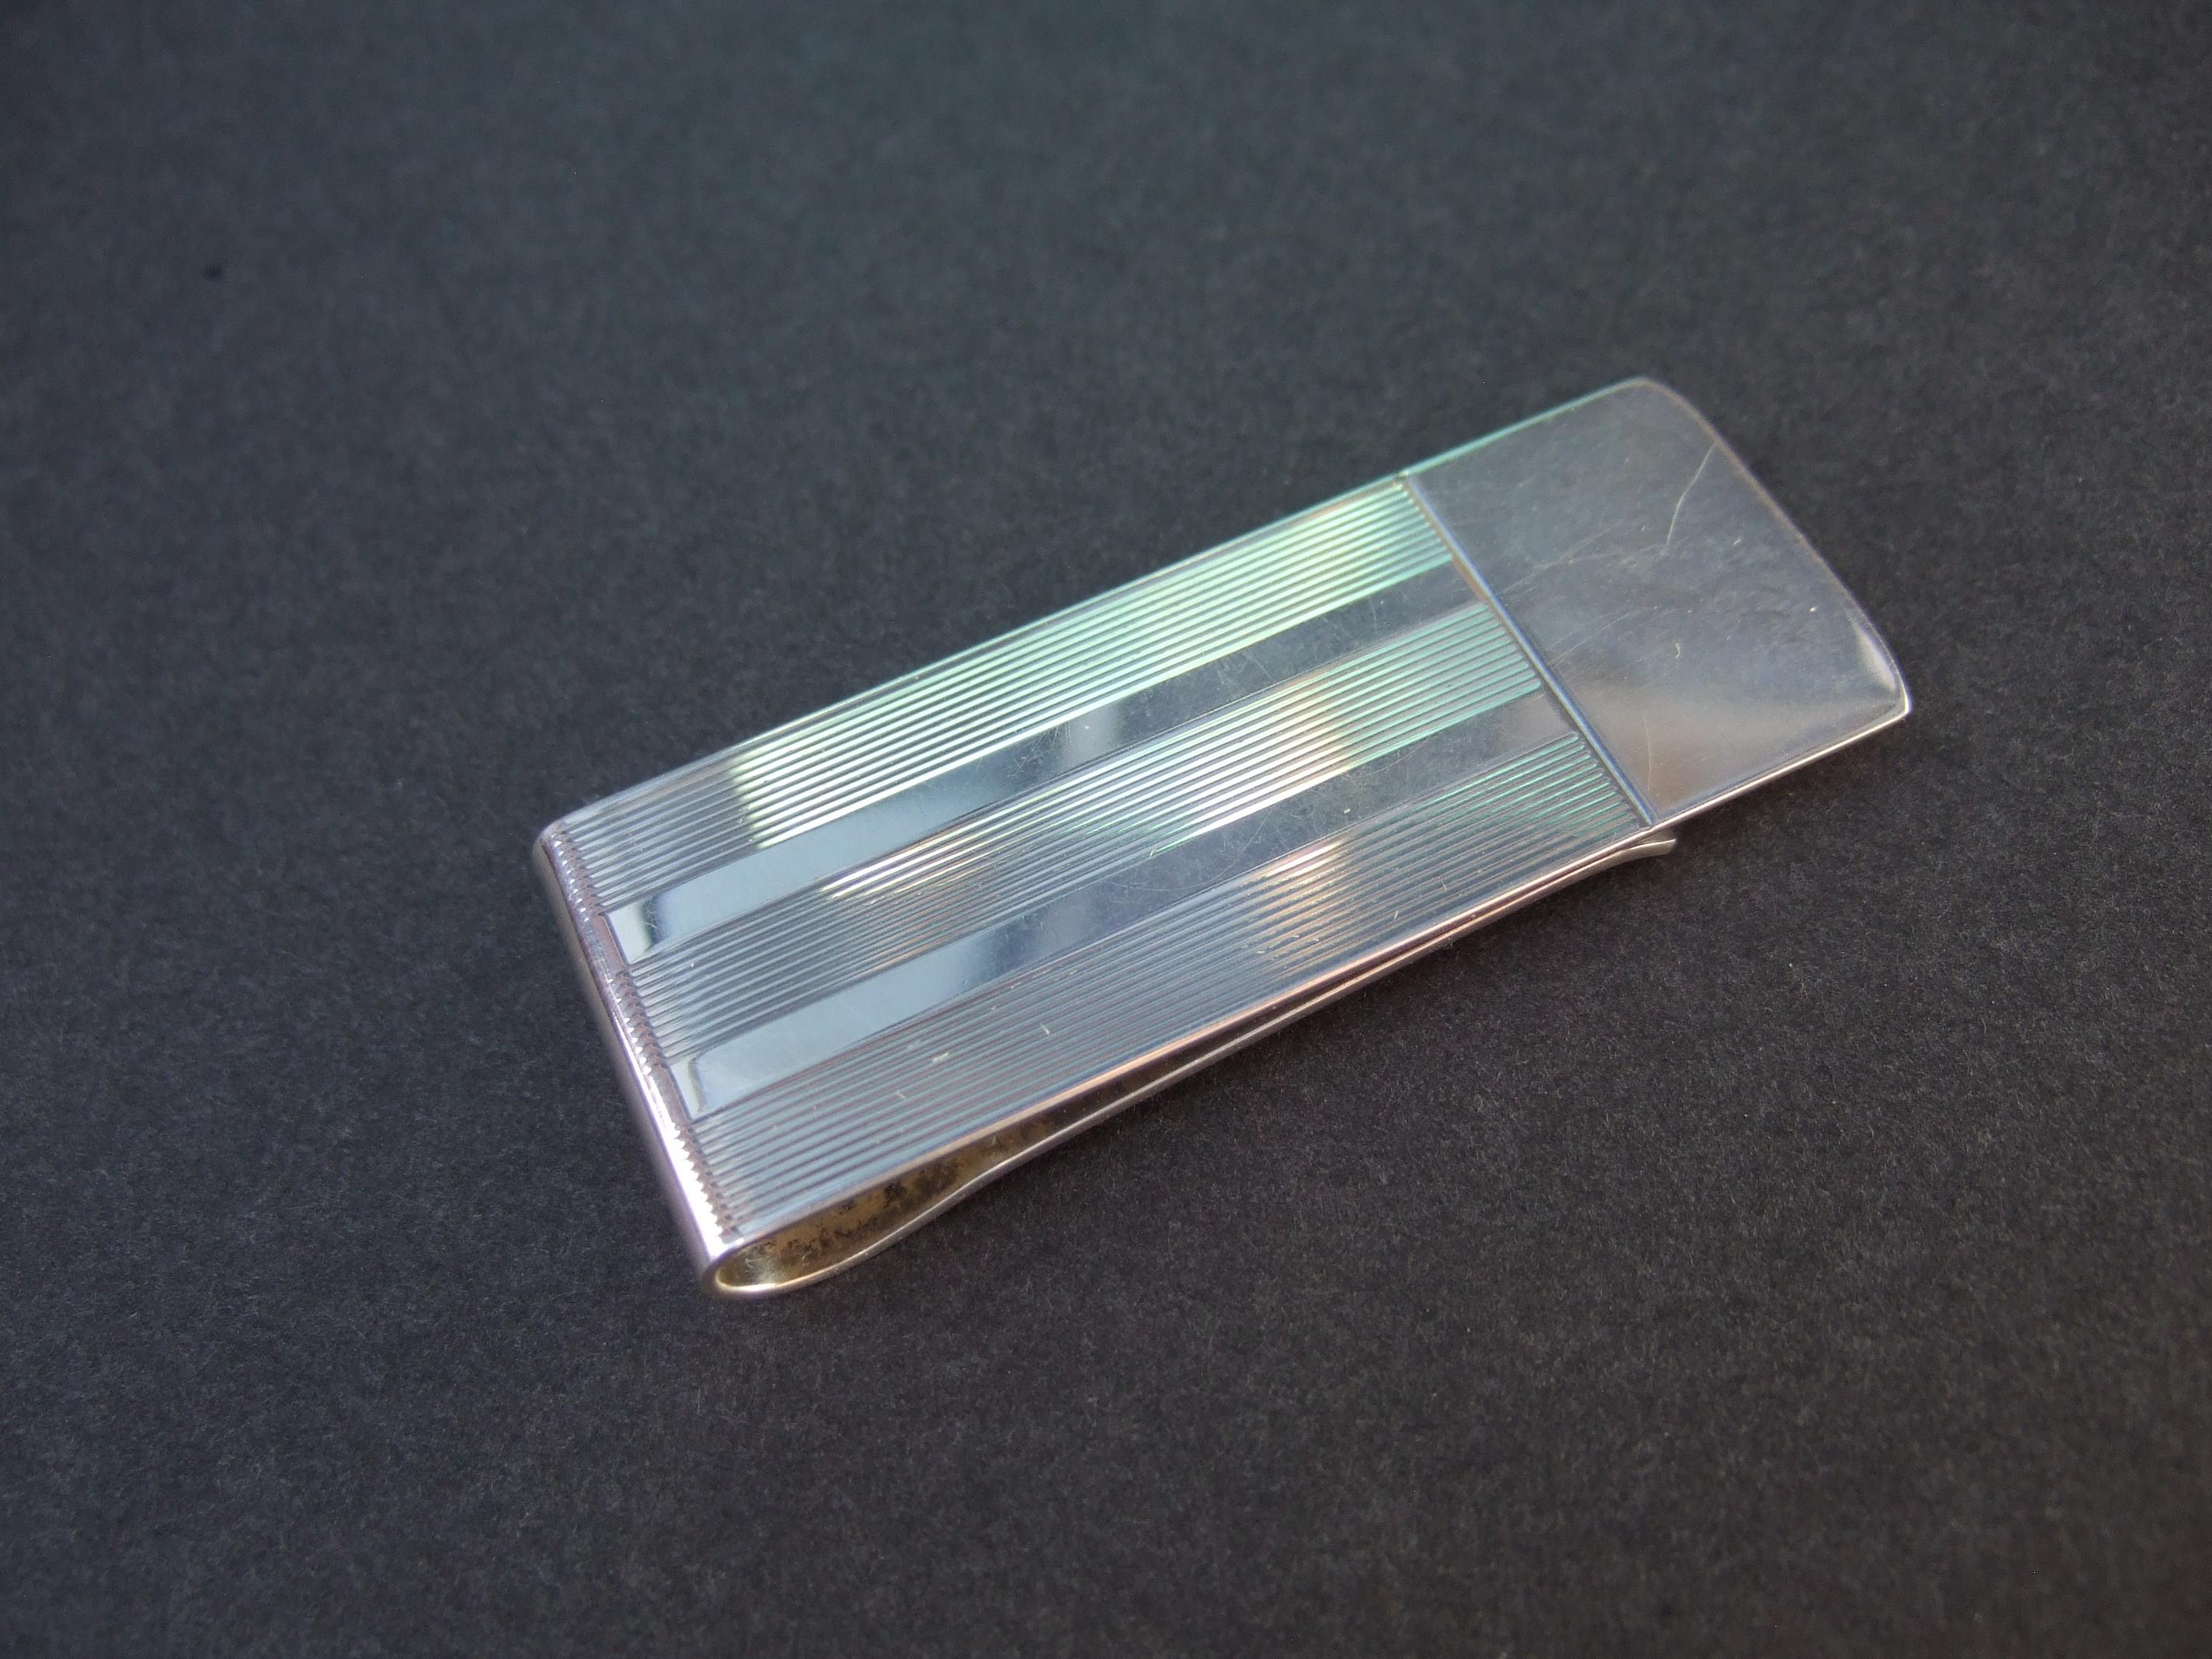 Tiffany & Co sterling silver money clip in Tiffany packaging c 1990s
The stylish sterling money clip is designed with horizontal stripes
on the front exterior. The design has an art deco style influence 

Makes an elegant, timeless collectible